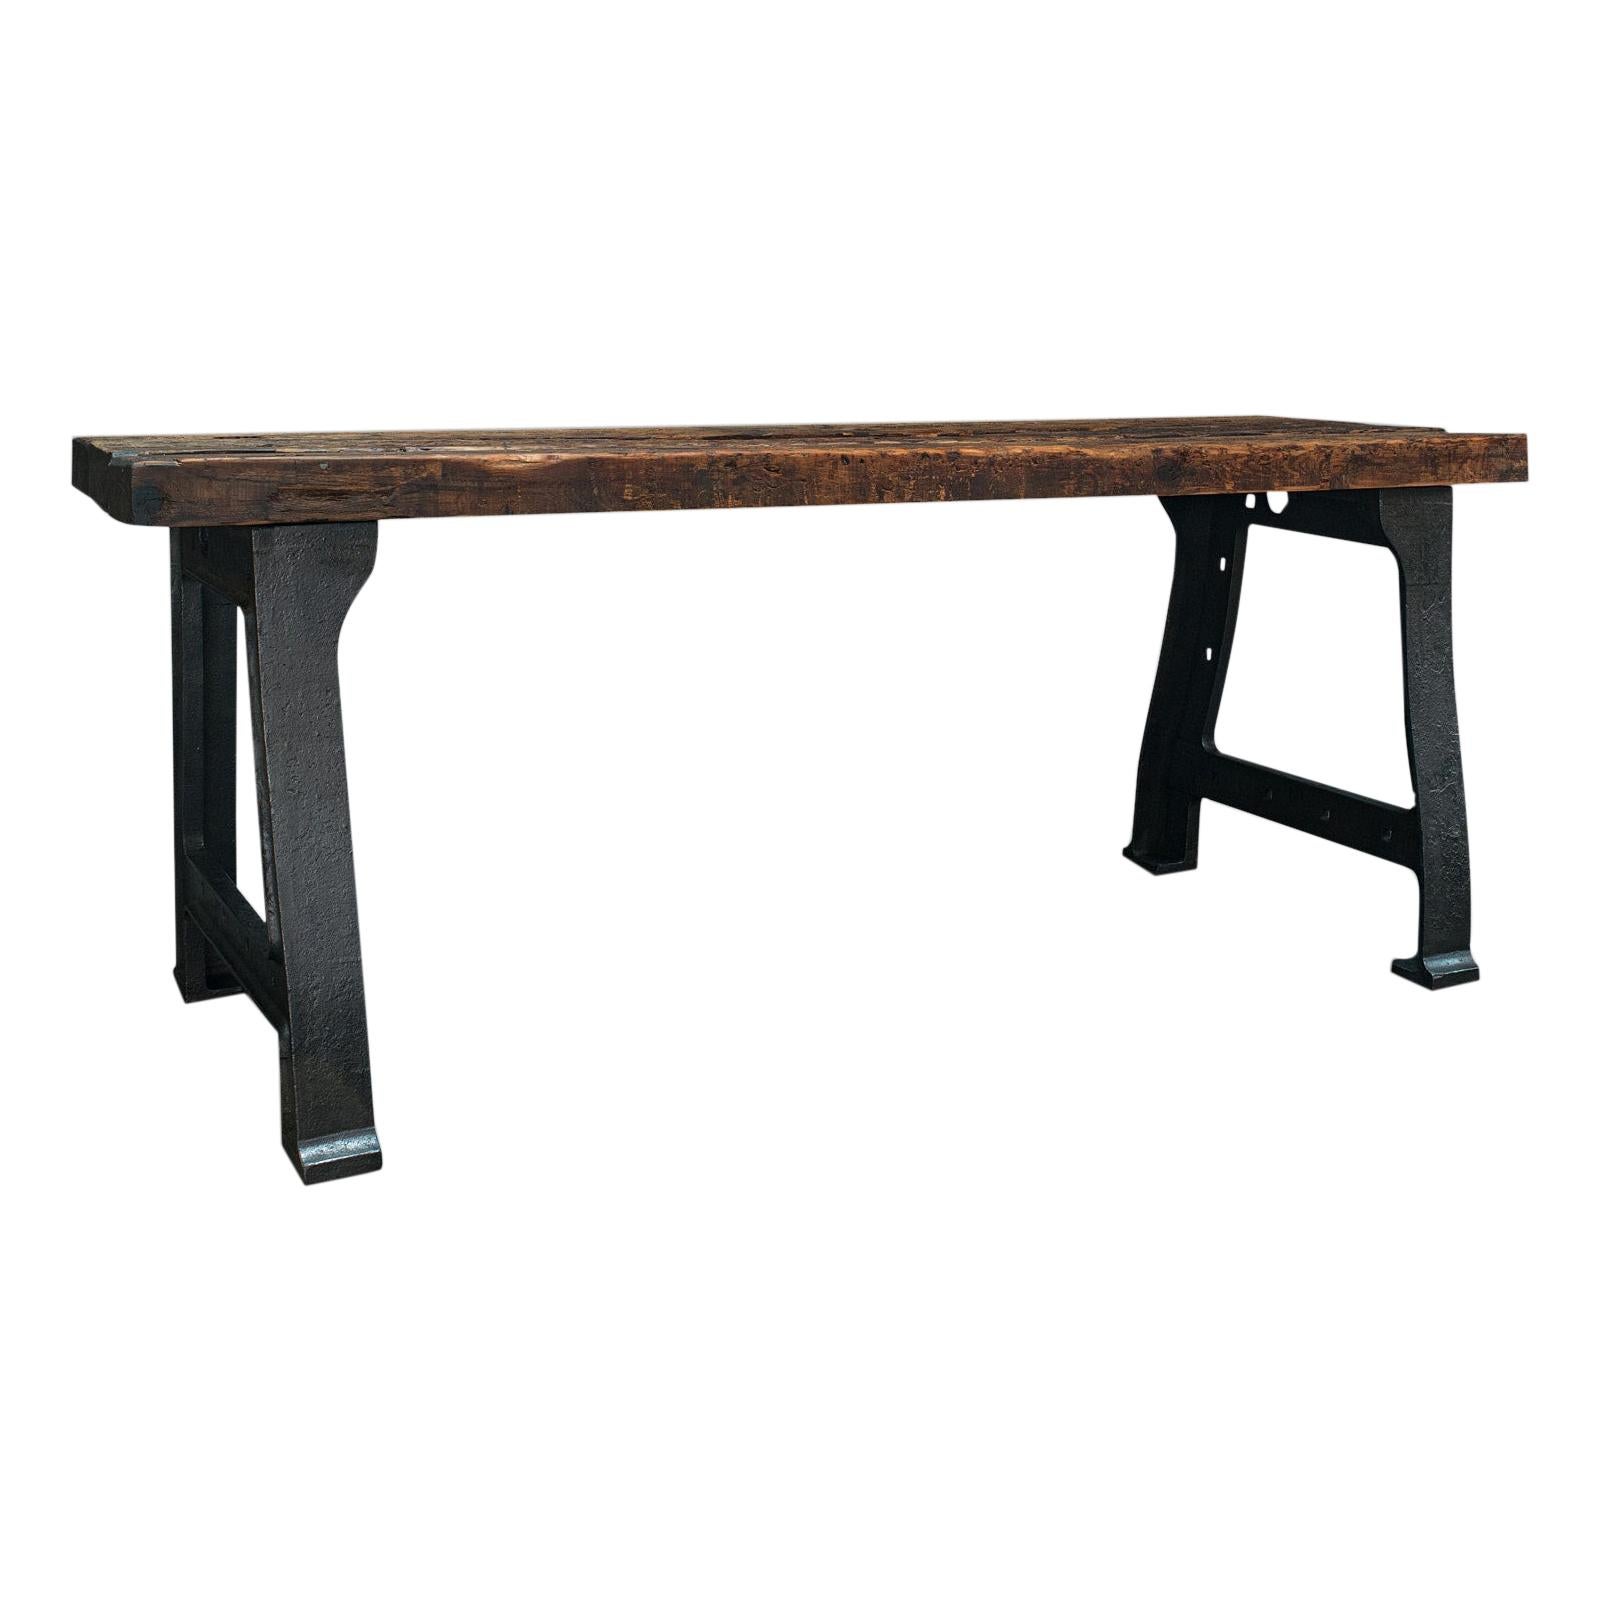 Antique Foundry Table, English, Pine, Iron, Heavy, Industrial Taste, Victorian For Sale